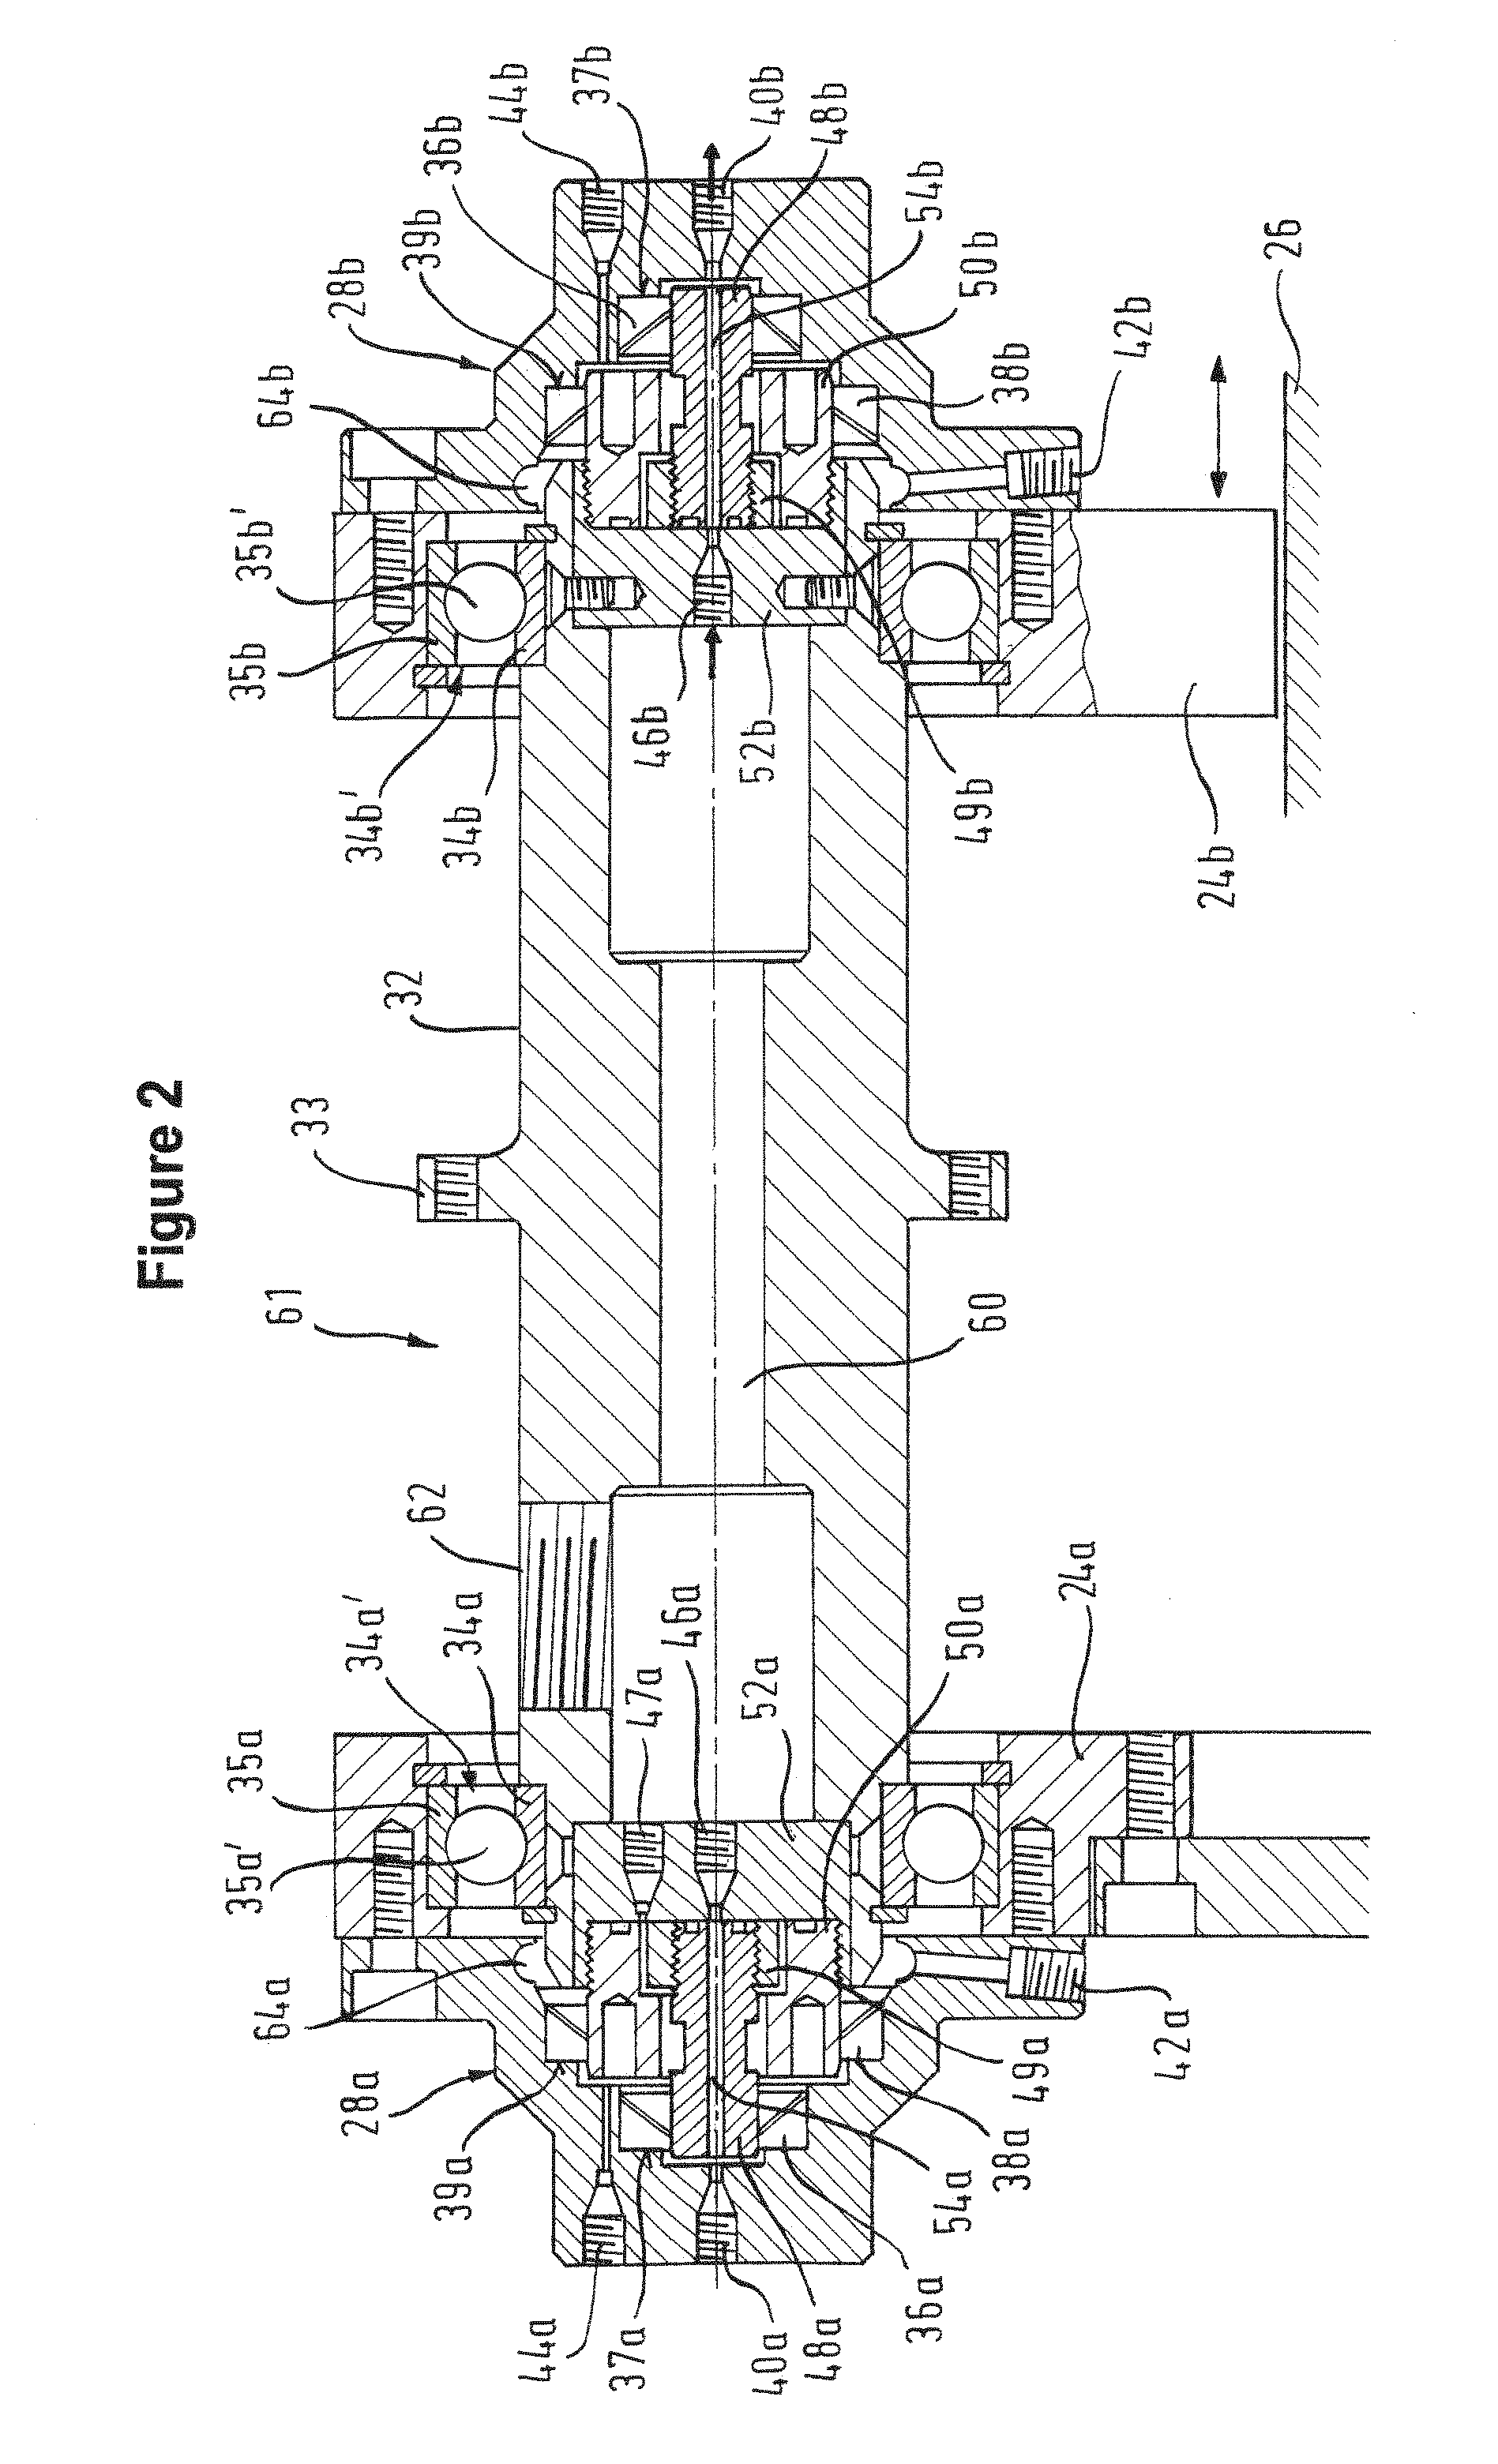 Apparatus for Performing a Centrifugal Field-Flow Fractionation Comprising a Seal and Method